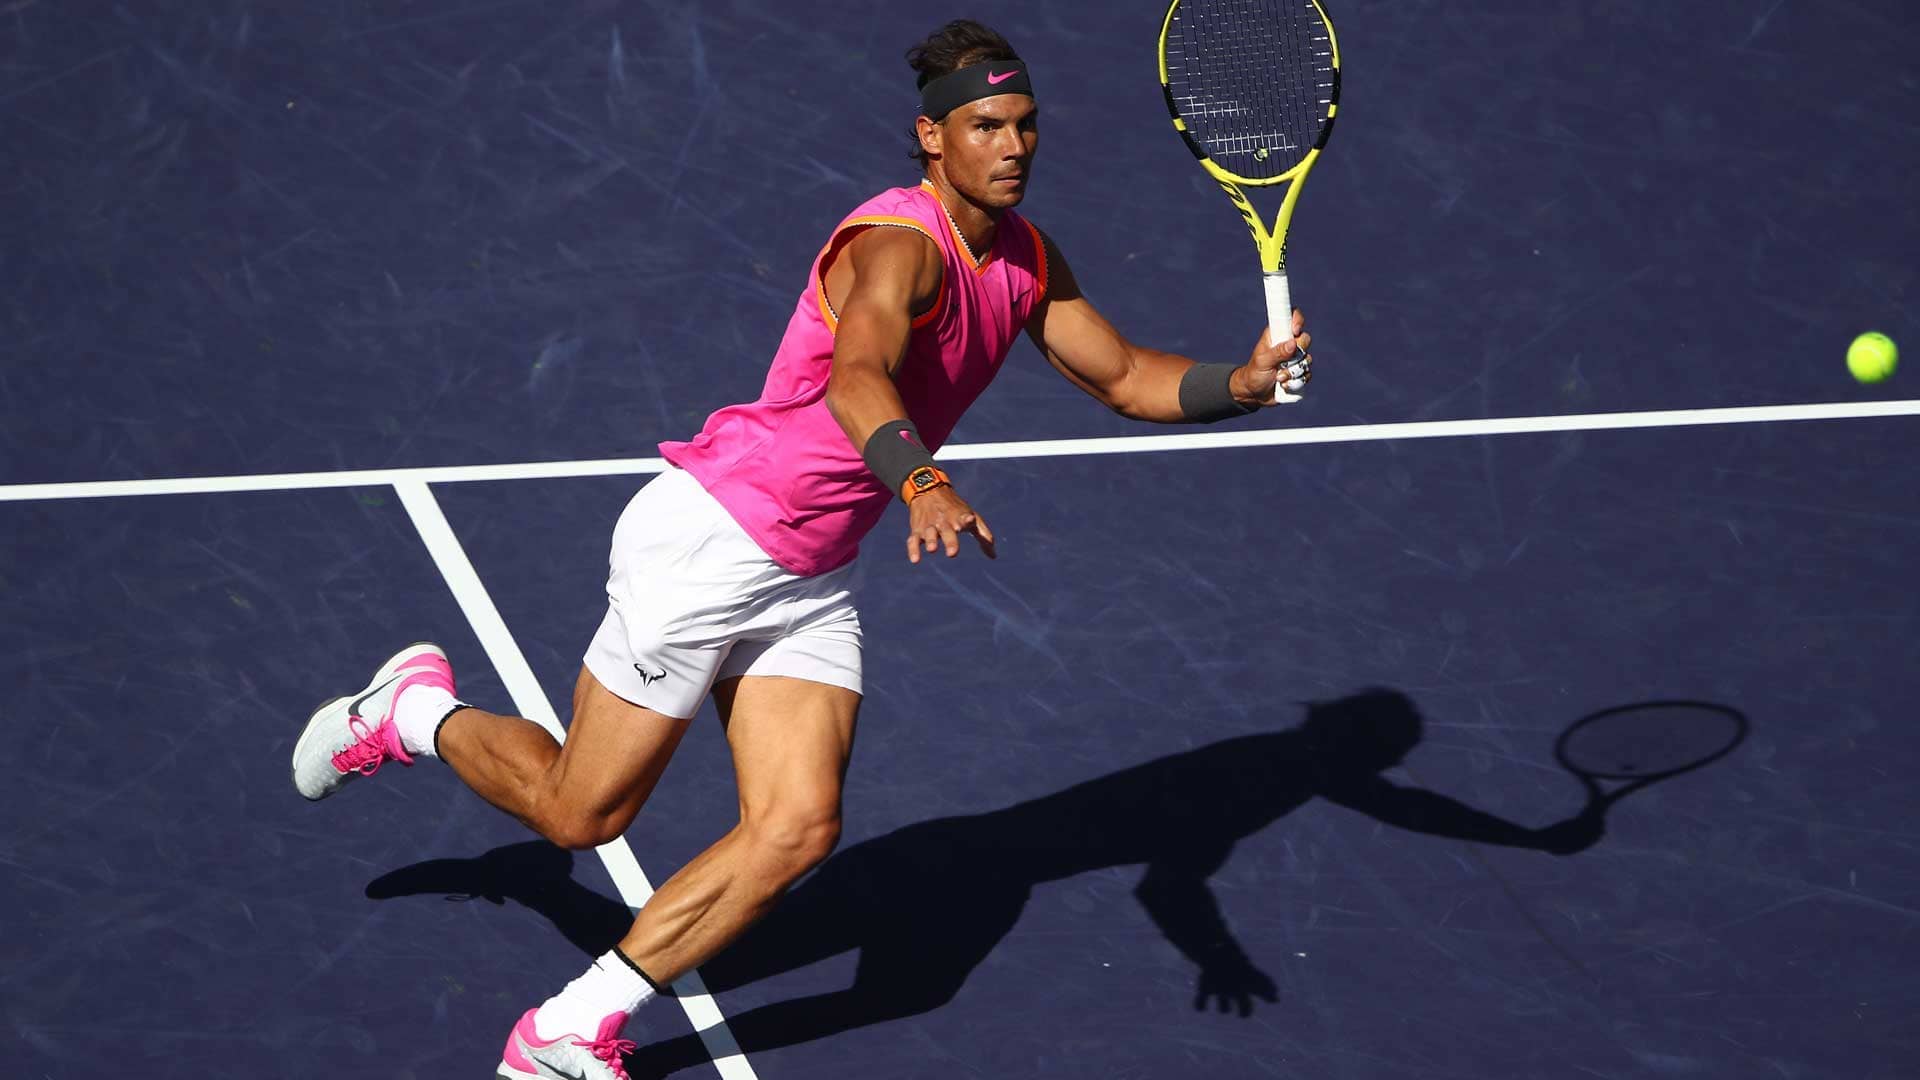 <a href='https://www.atptour.com/en/players/rafael-nadal/n409/overview'>Rafael Nadal</a> hits a volley in his Indian Wells quarter-final against <a href='https://www.atptour.com/en/players/karen-khachanov/ke29/overview'>Karen Khachanov</a>.